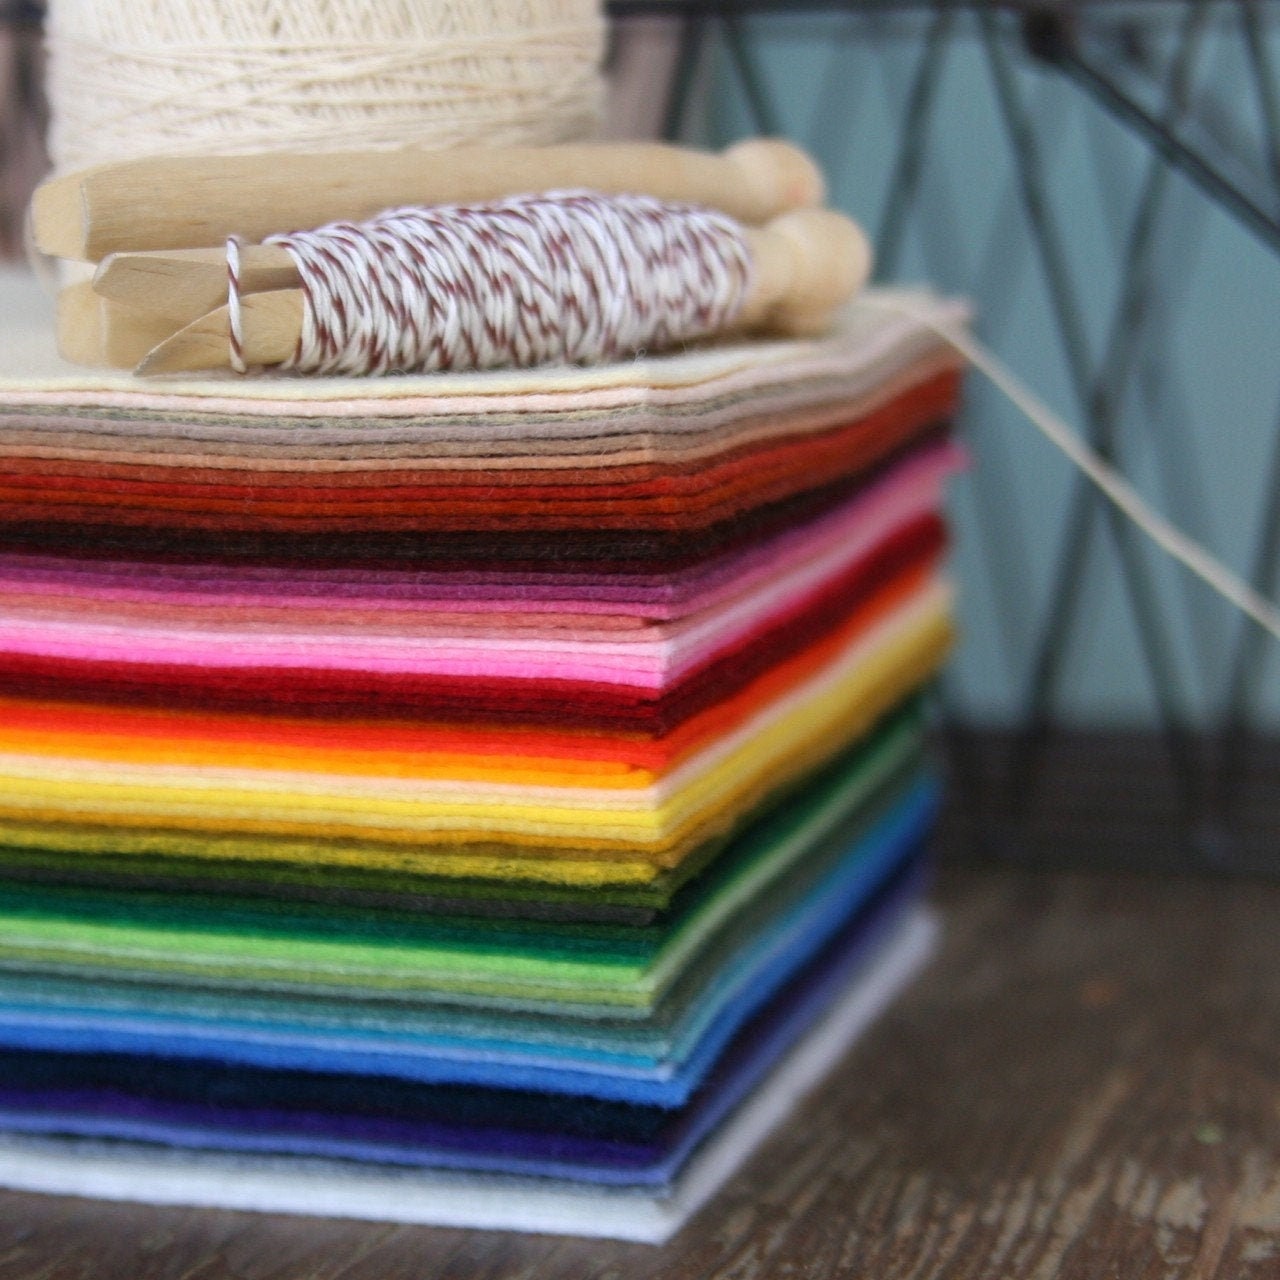 Wool Felt // 5 9x12 Sheets // Choose Your Own Colors // - Etsy